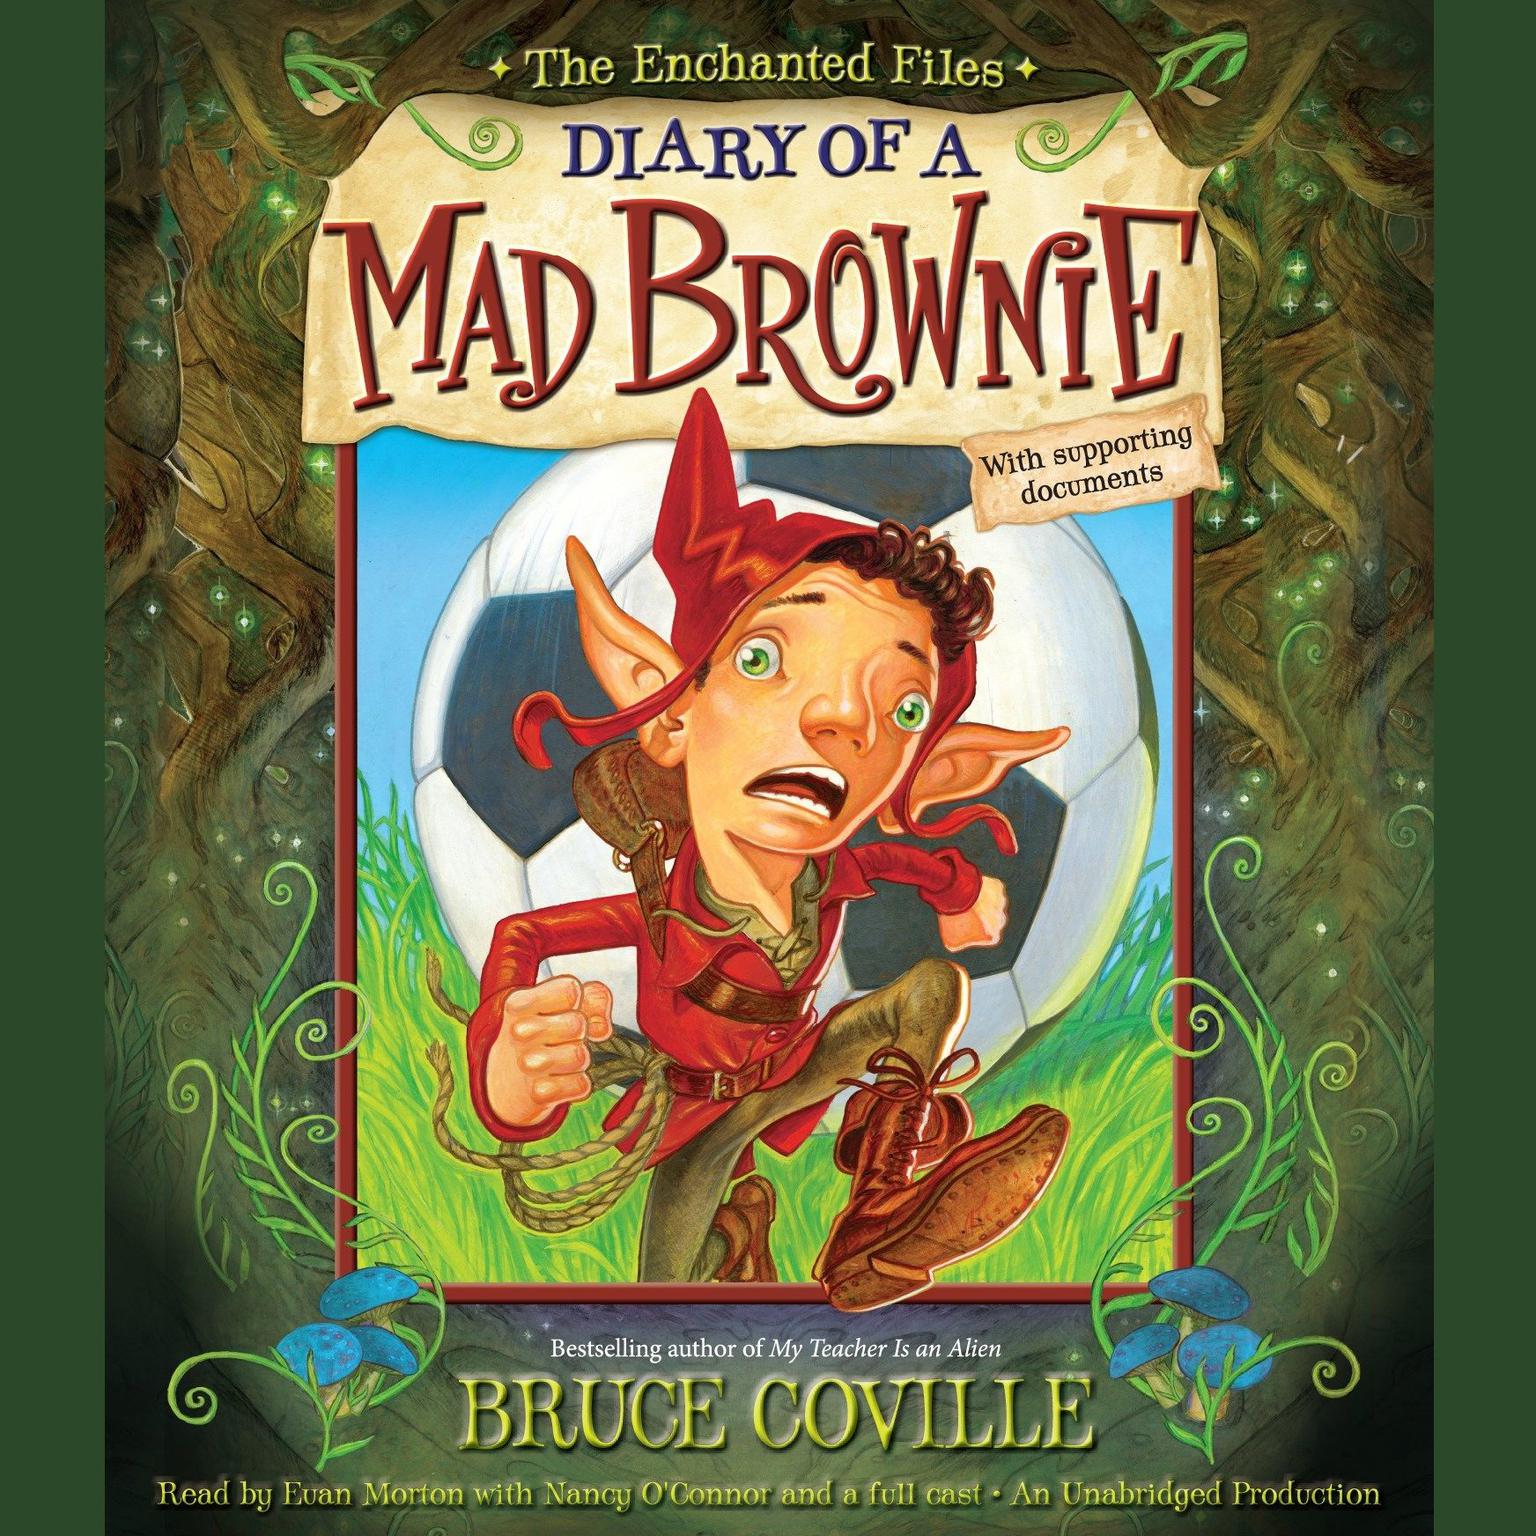 The Enchanted Files: Diary of a Mad Brownie Audiobook, by Bruce Coville